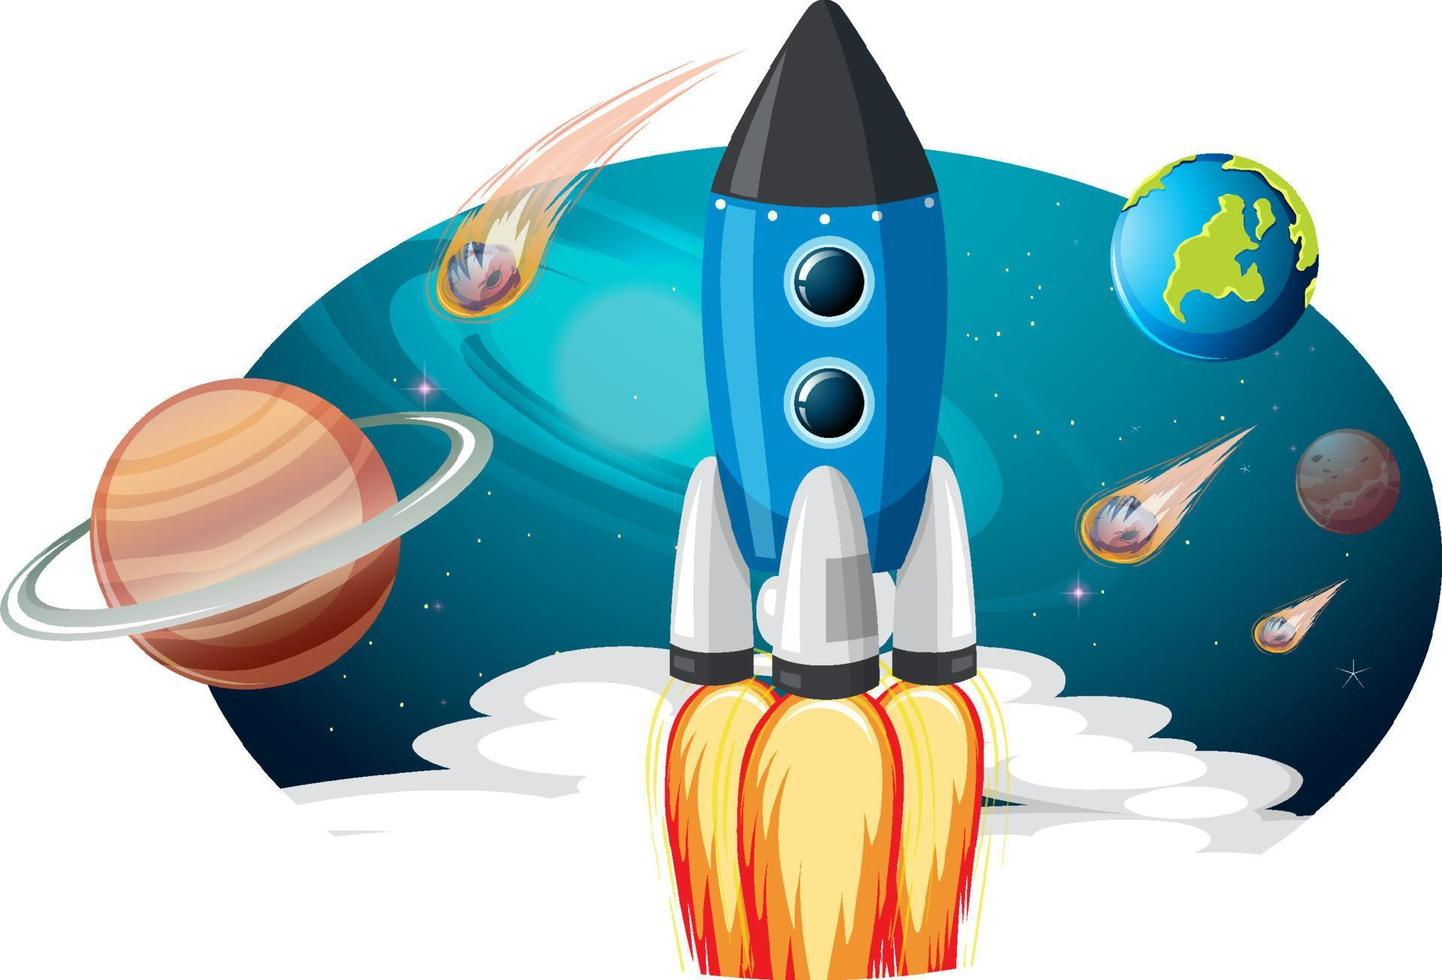 Rocket ship with many planets and asteroids vector